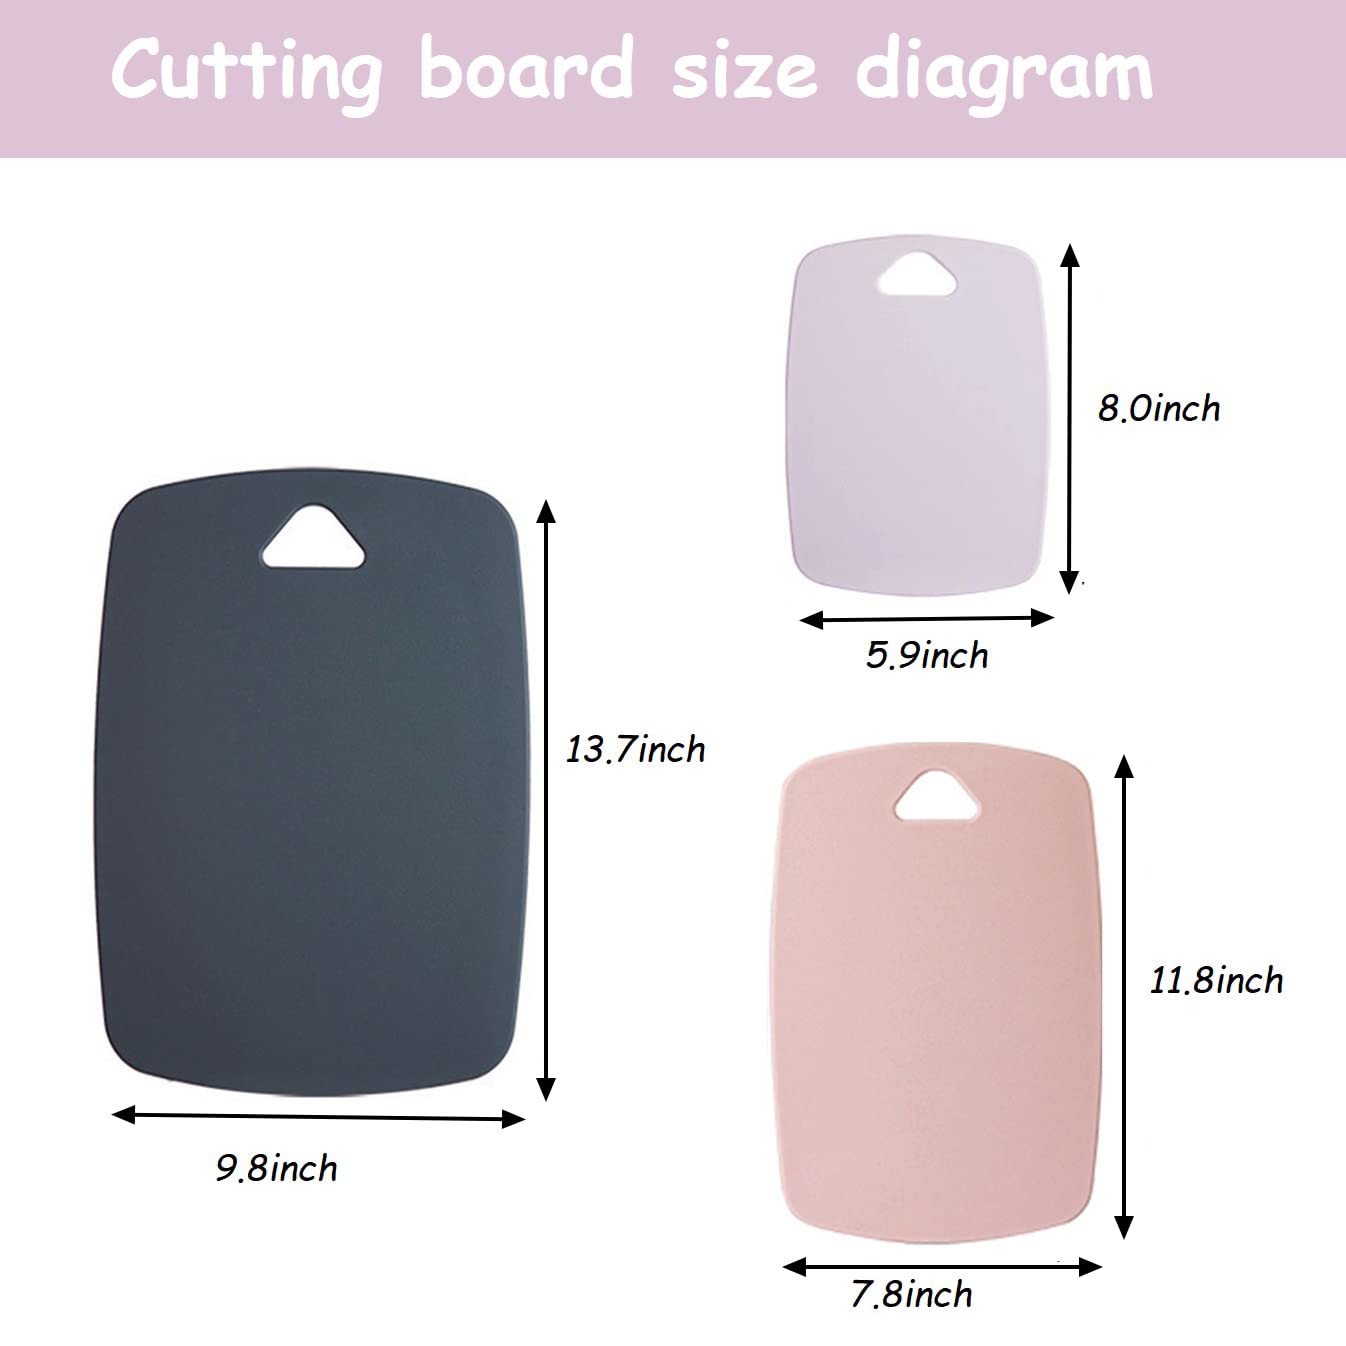 Plastic Cutting Board Set of 3, Cutting Boards for Kitchen,Thick Chopping Boards for Meat, Veggies, Fruits, with Easy Grip Handle, Dishwasher Saf,Suitable for outdoor camping, RV. (Pink)